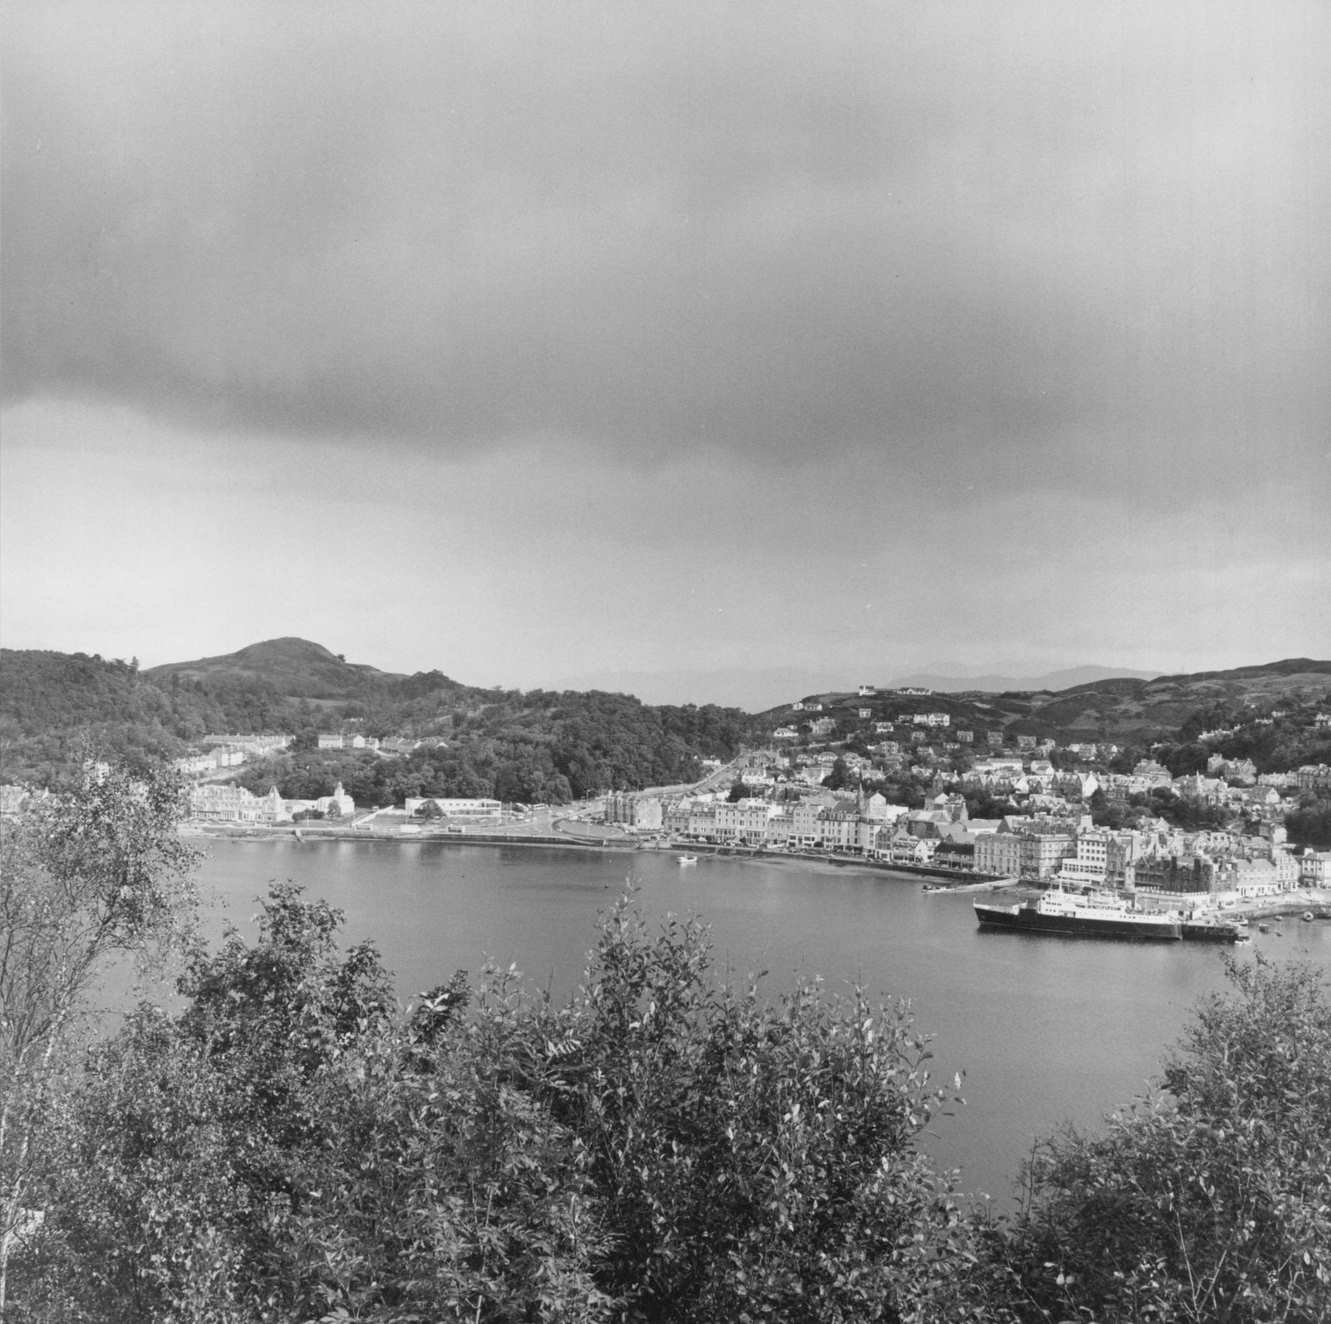 General view of Oban from Pulpit Hill, Scotland, 1960.